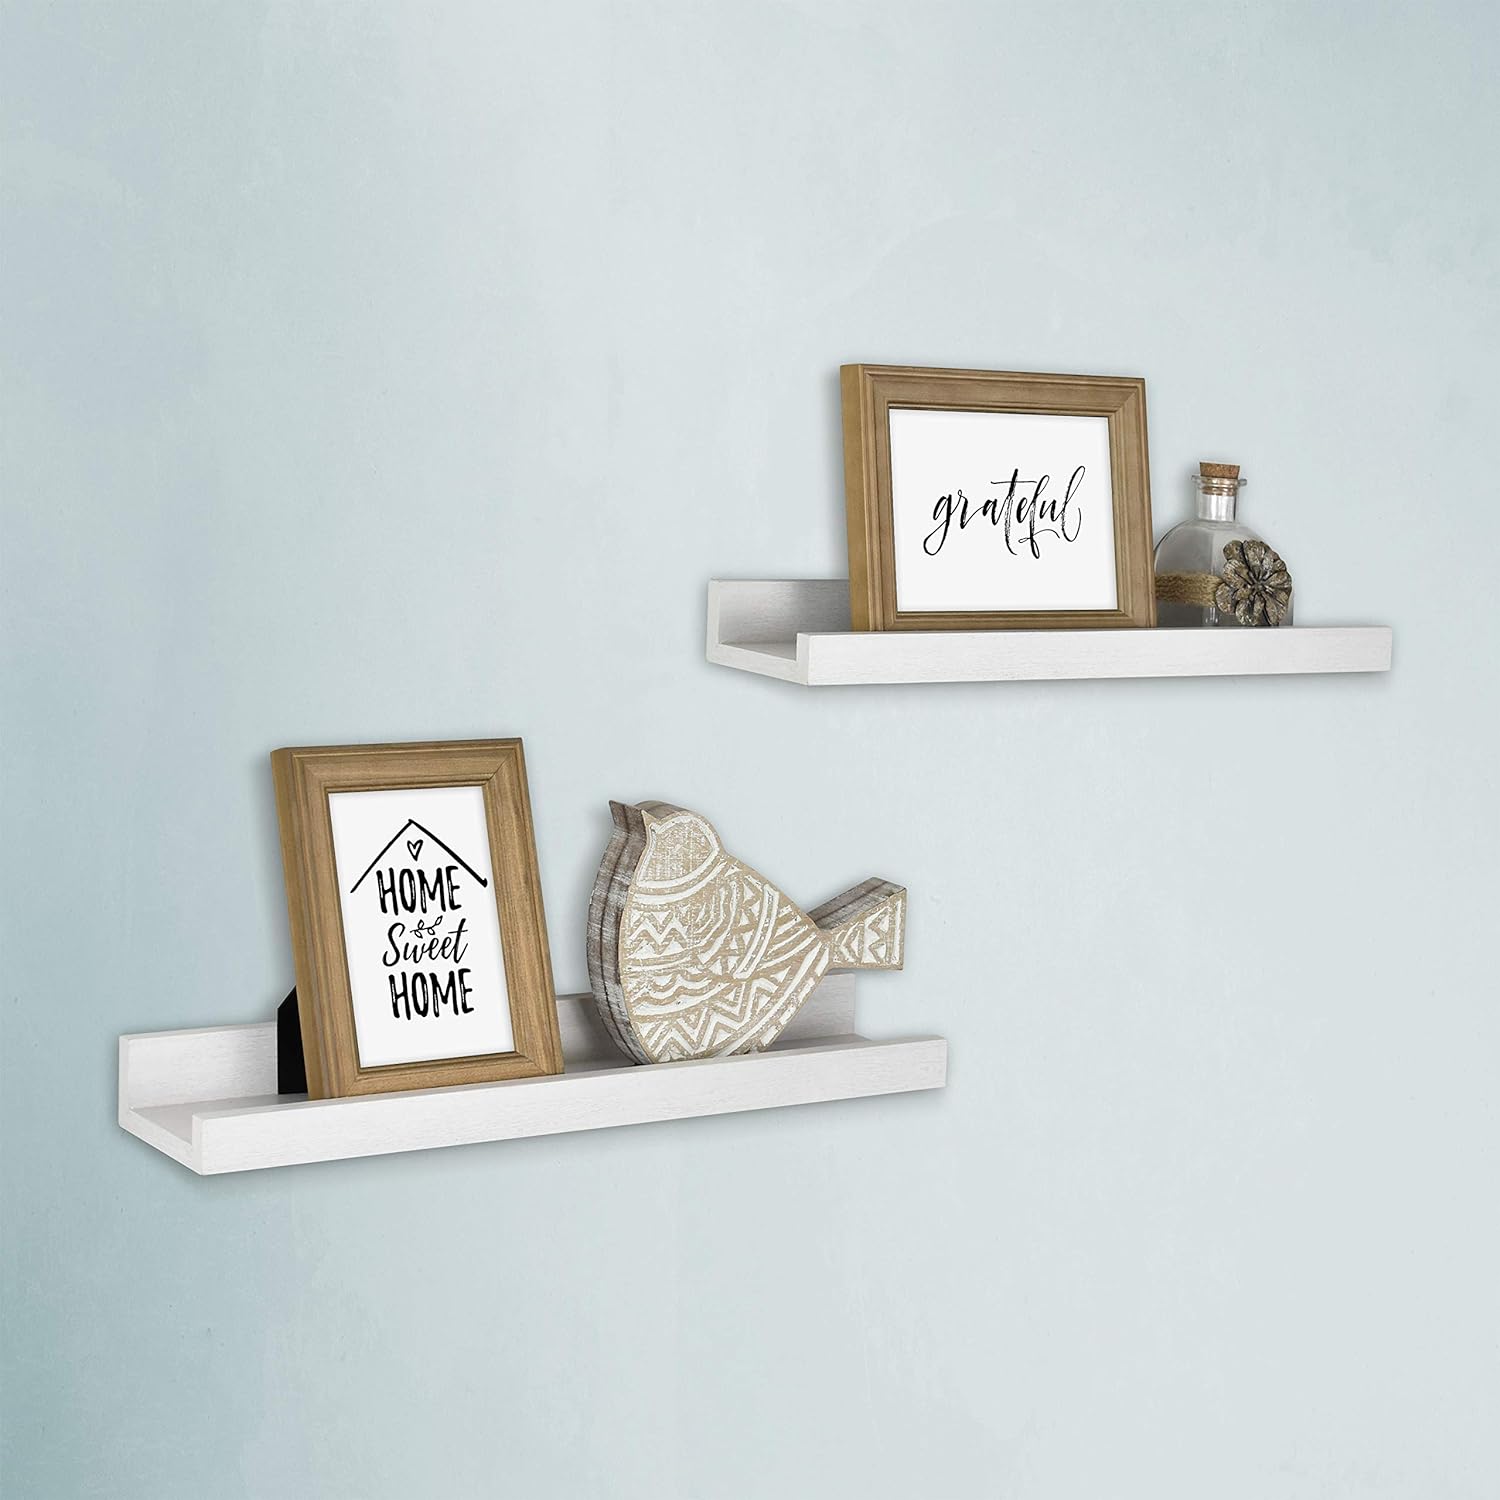 These shelves are so well made and easy to hang. They look great! They were the perfect touch for an area that was a little difficult to decorate. I'm planning to buy more for a couple of other spots in our house.